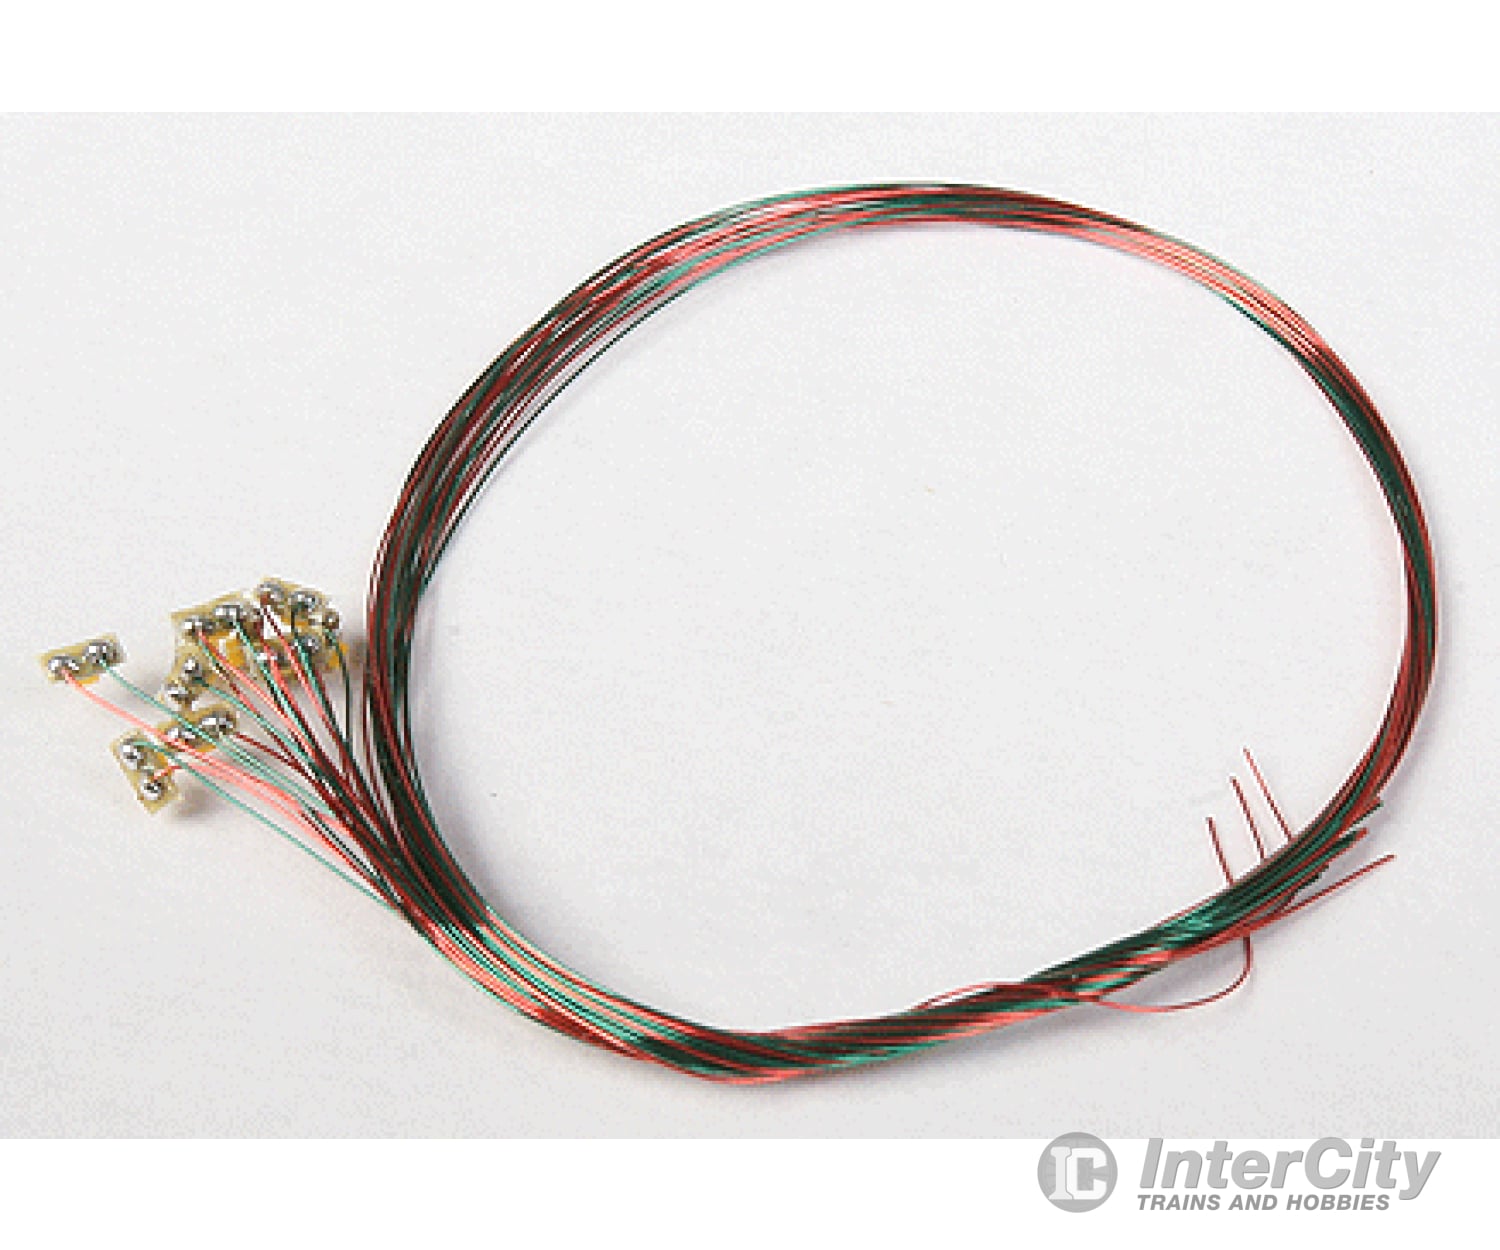 Train Control Systems 1322 Surface-Mount Led W/6 15.2Cm W/Attached Magnet Wire Lead 10-Pack --